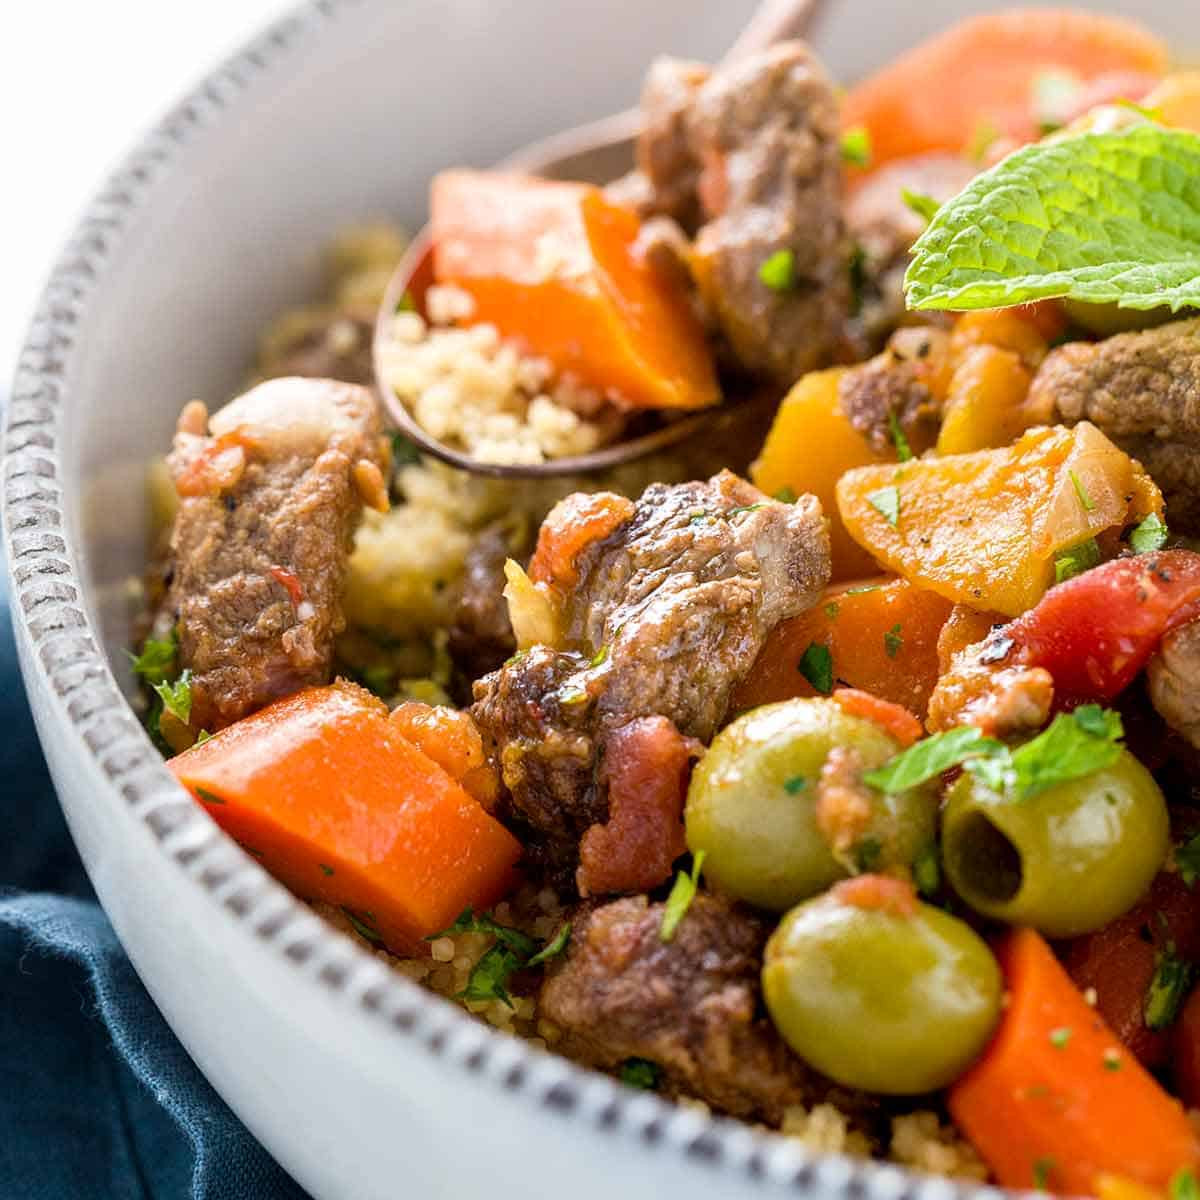 Moroccan Lamb Stew Recipe
 Moroccan Lamb Stew Recipe with Couscous